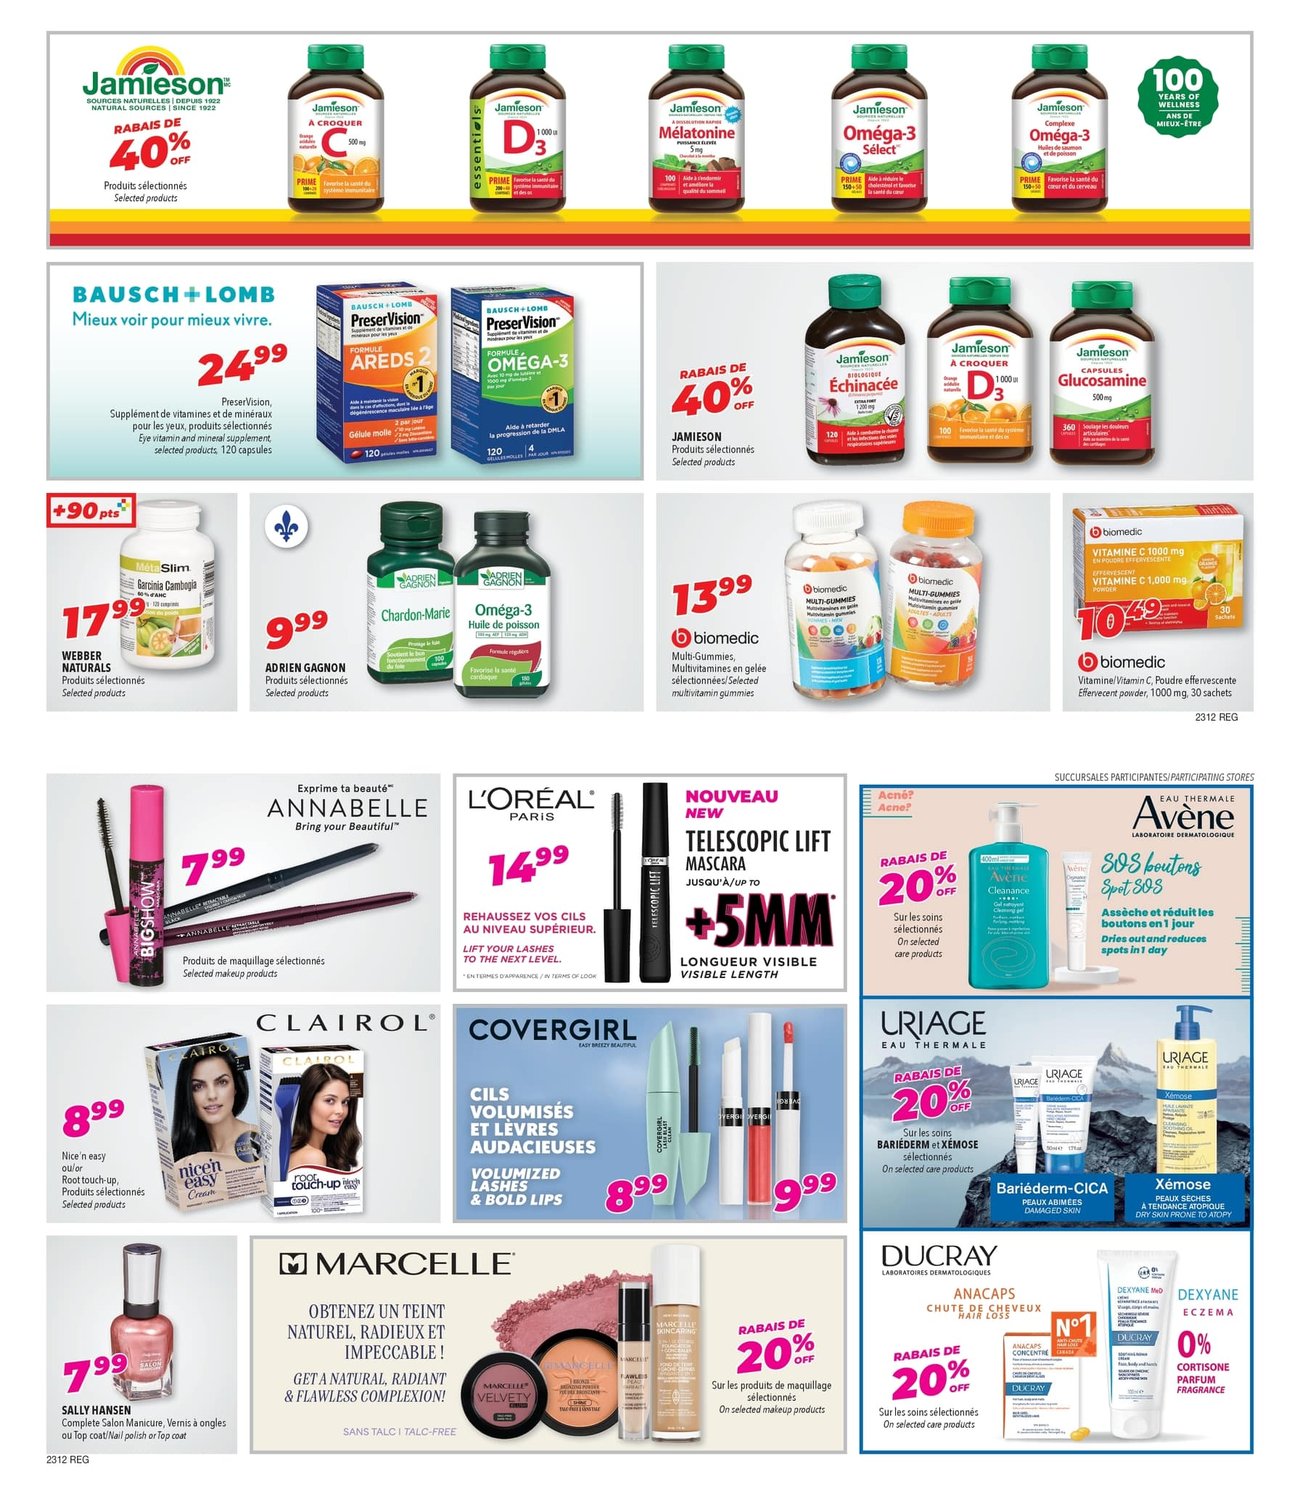 Familiprix - Weekly Flyer Specials - Page 11